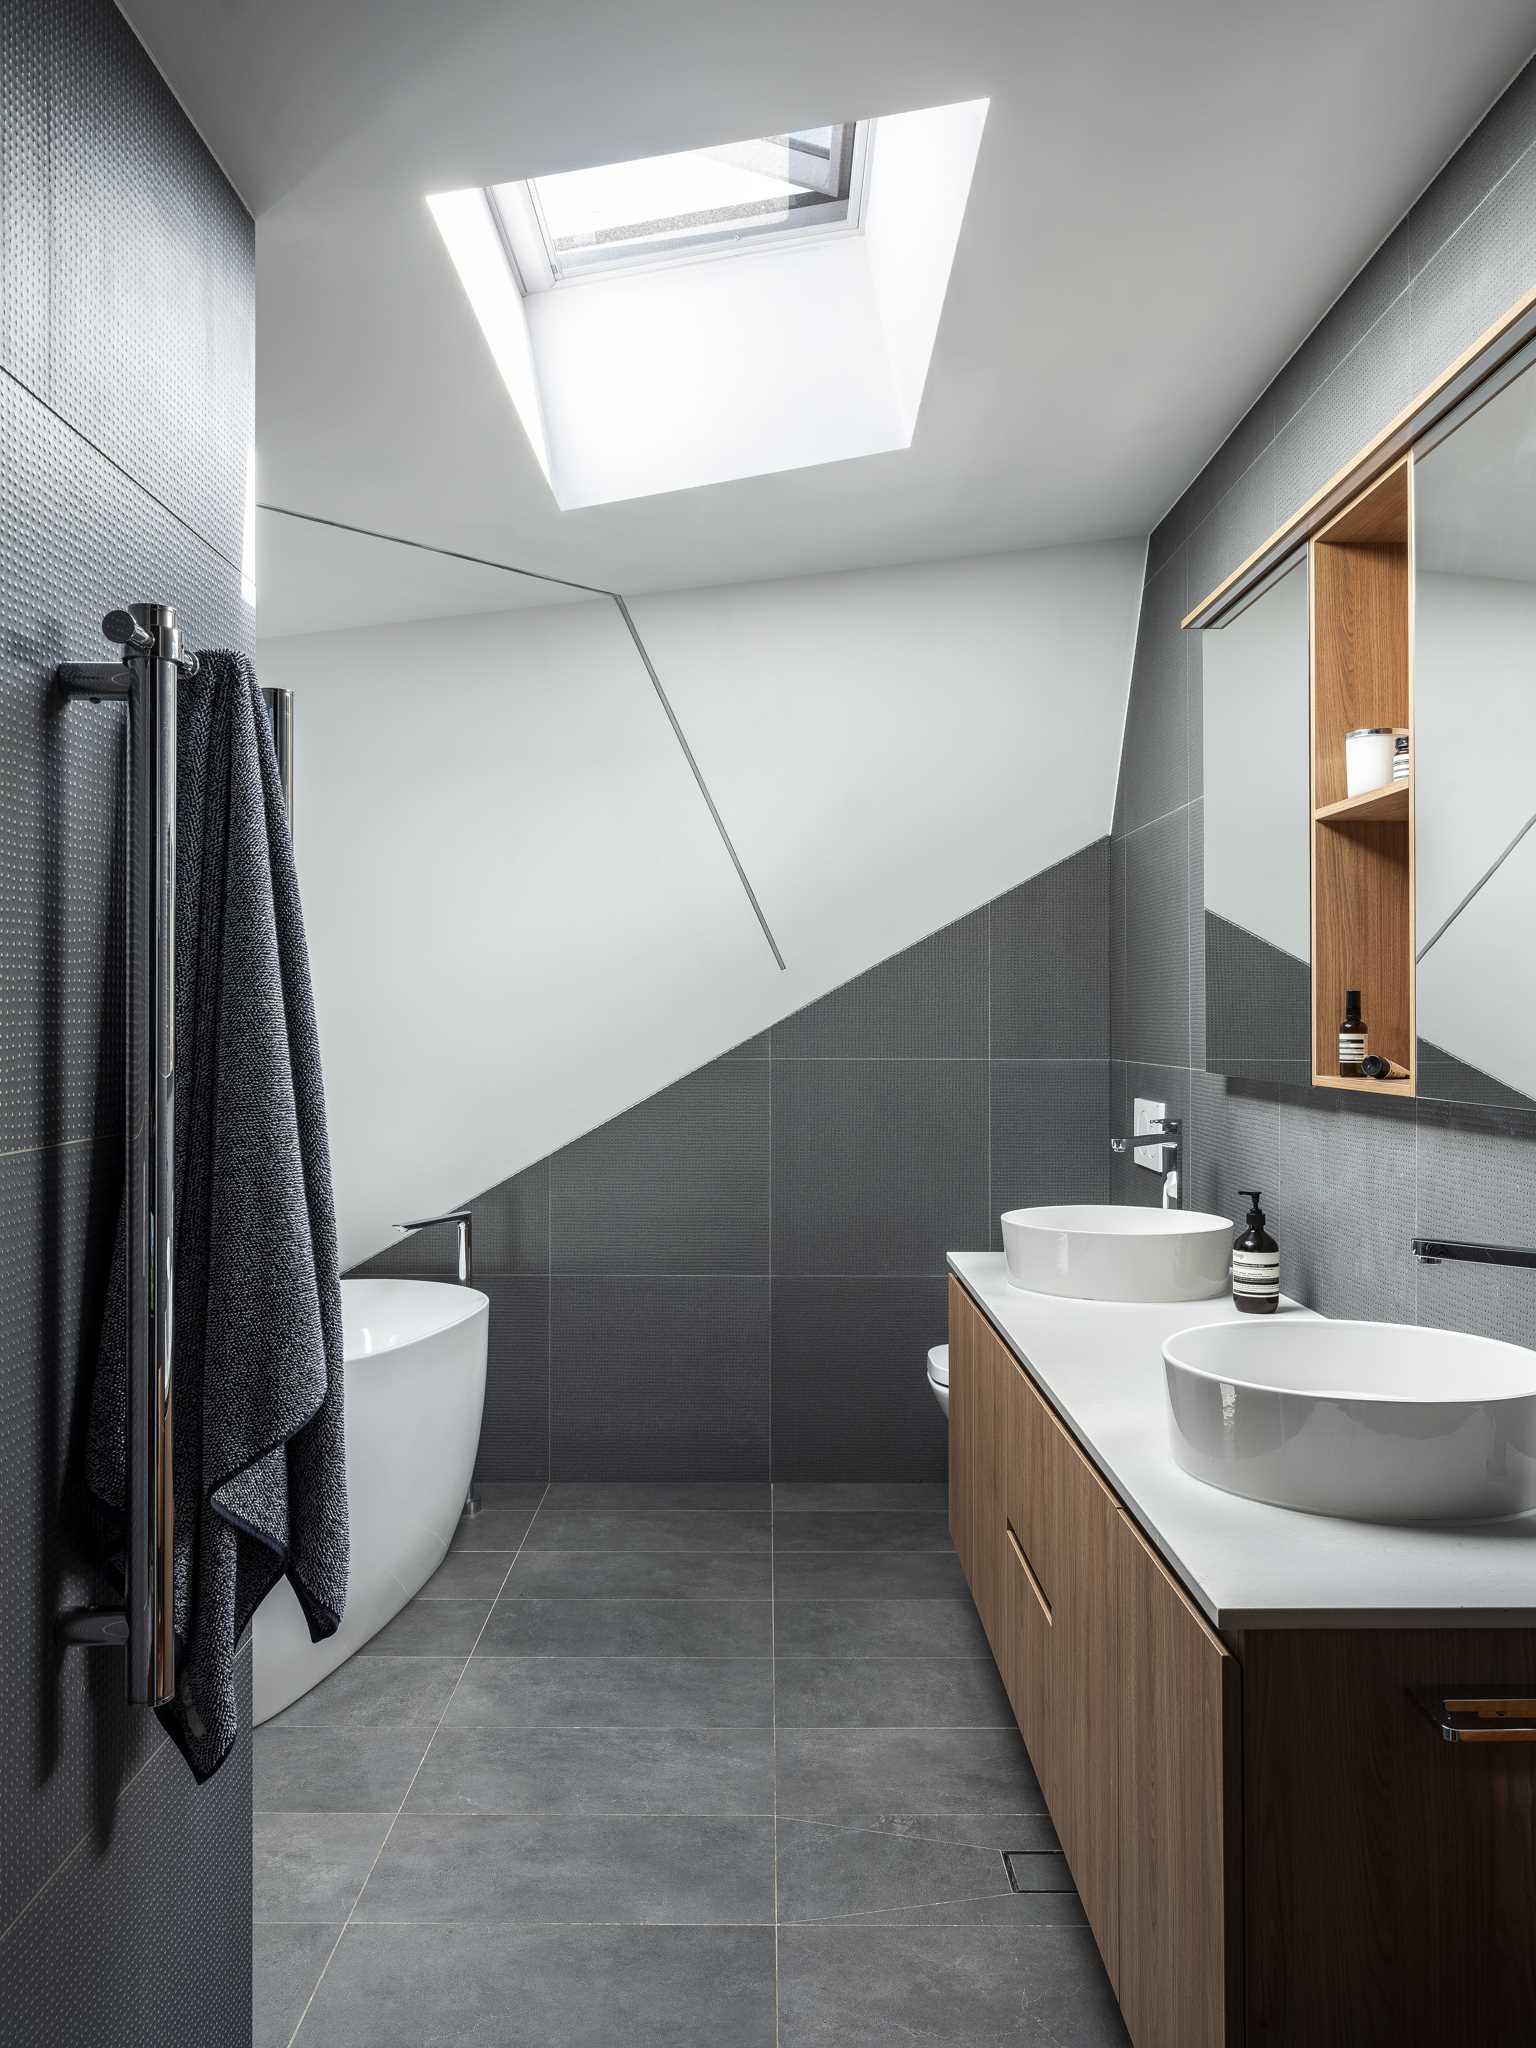 In this bathroom, grey tiles partially installed with a diagonal design add visual interest and are paired with white walls and a wood vanity. A skylight helps to keep the bathroom bright.